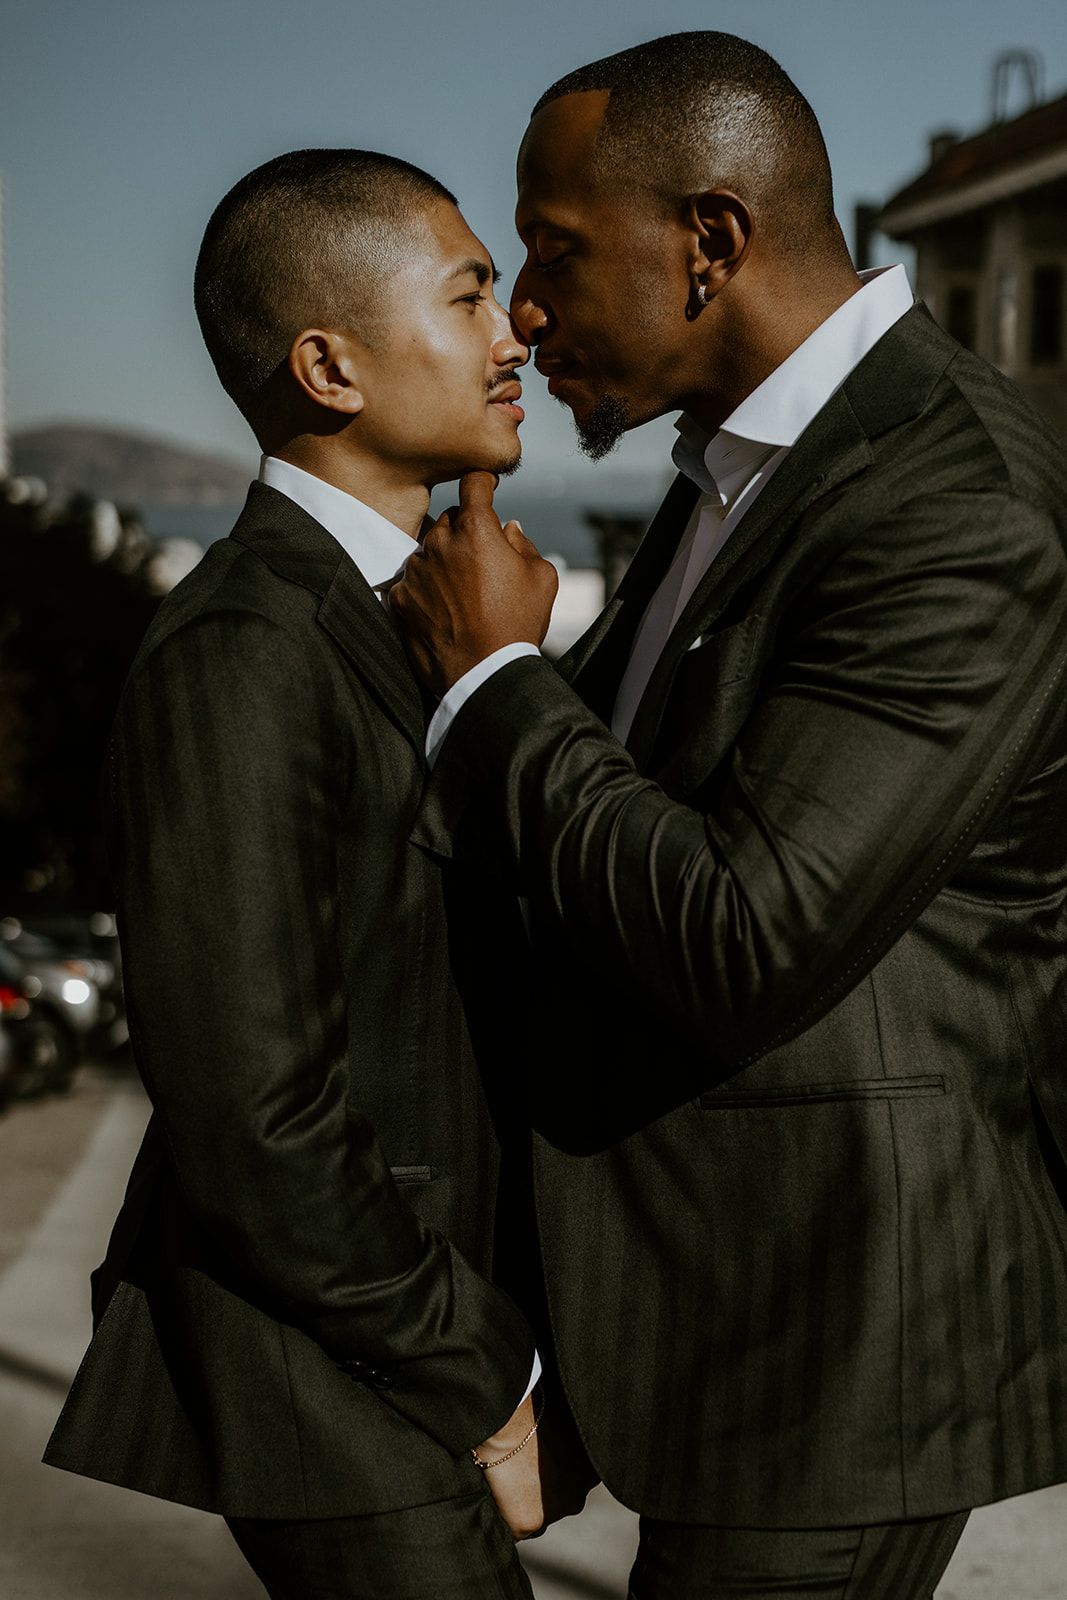 Intimate Elopement in San Francisco